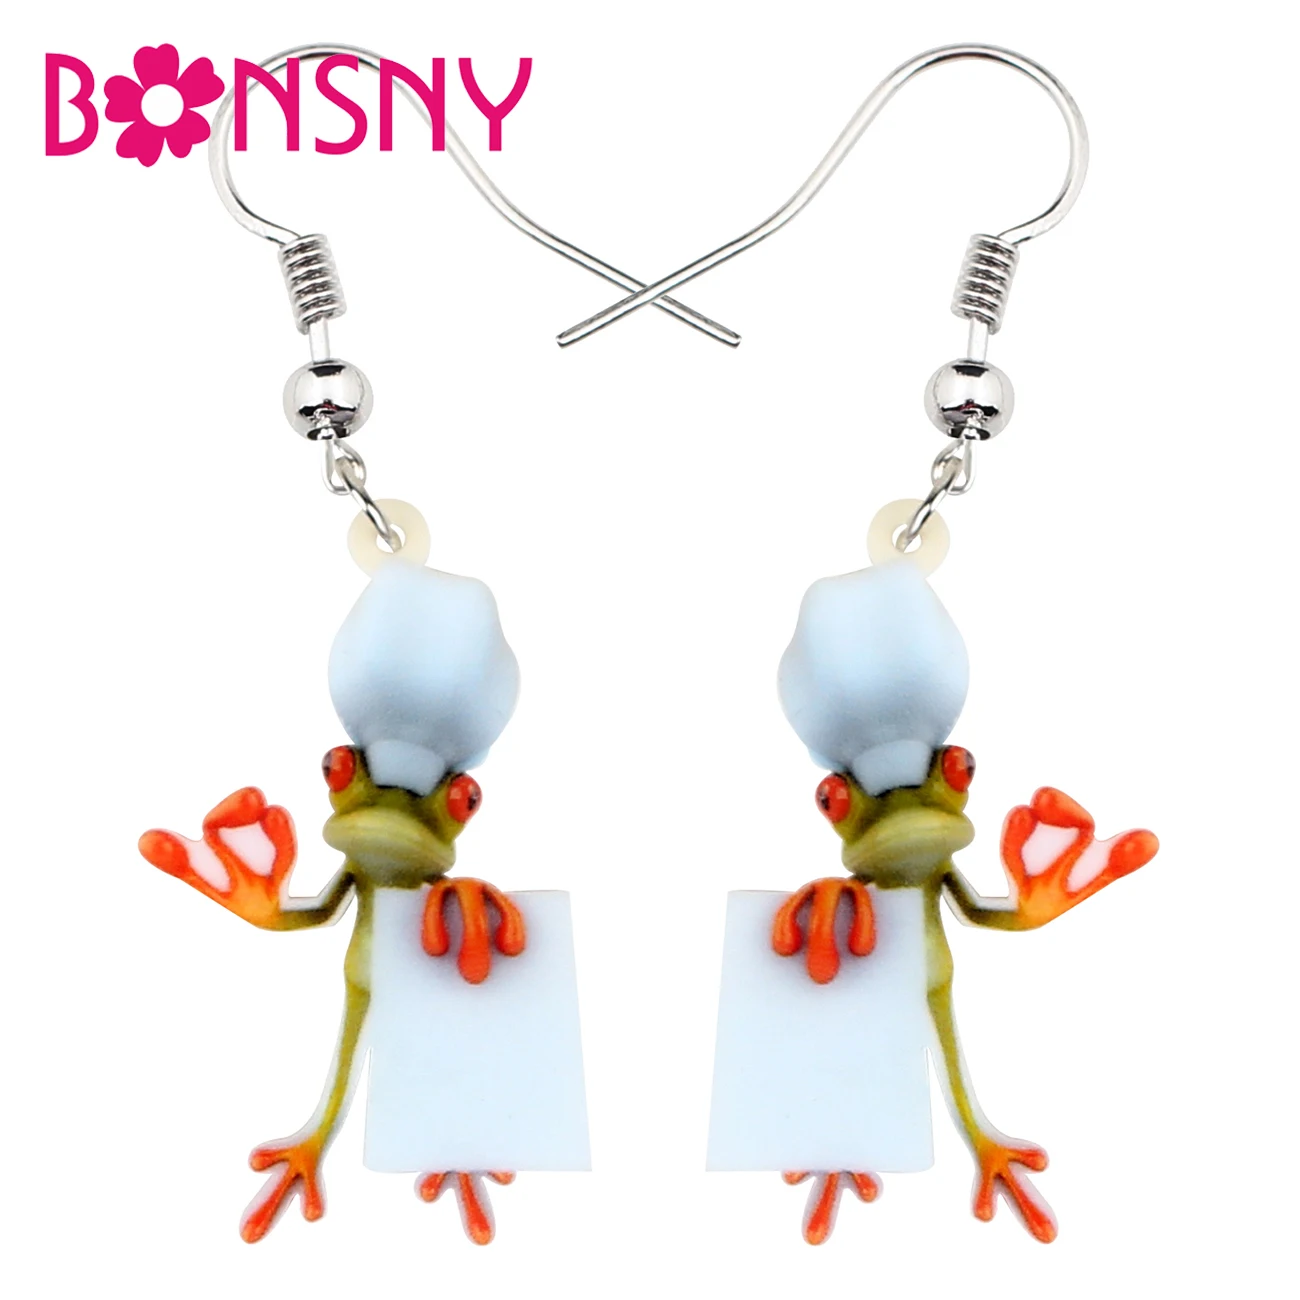 

Bonsny Acrylic Anime Cook Chef Frog Earrings Drop Dangle Funny Cute Animal Jewelry For Women Girls Gift Charms Bijoux Brincos